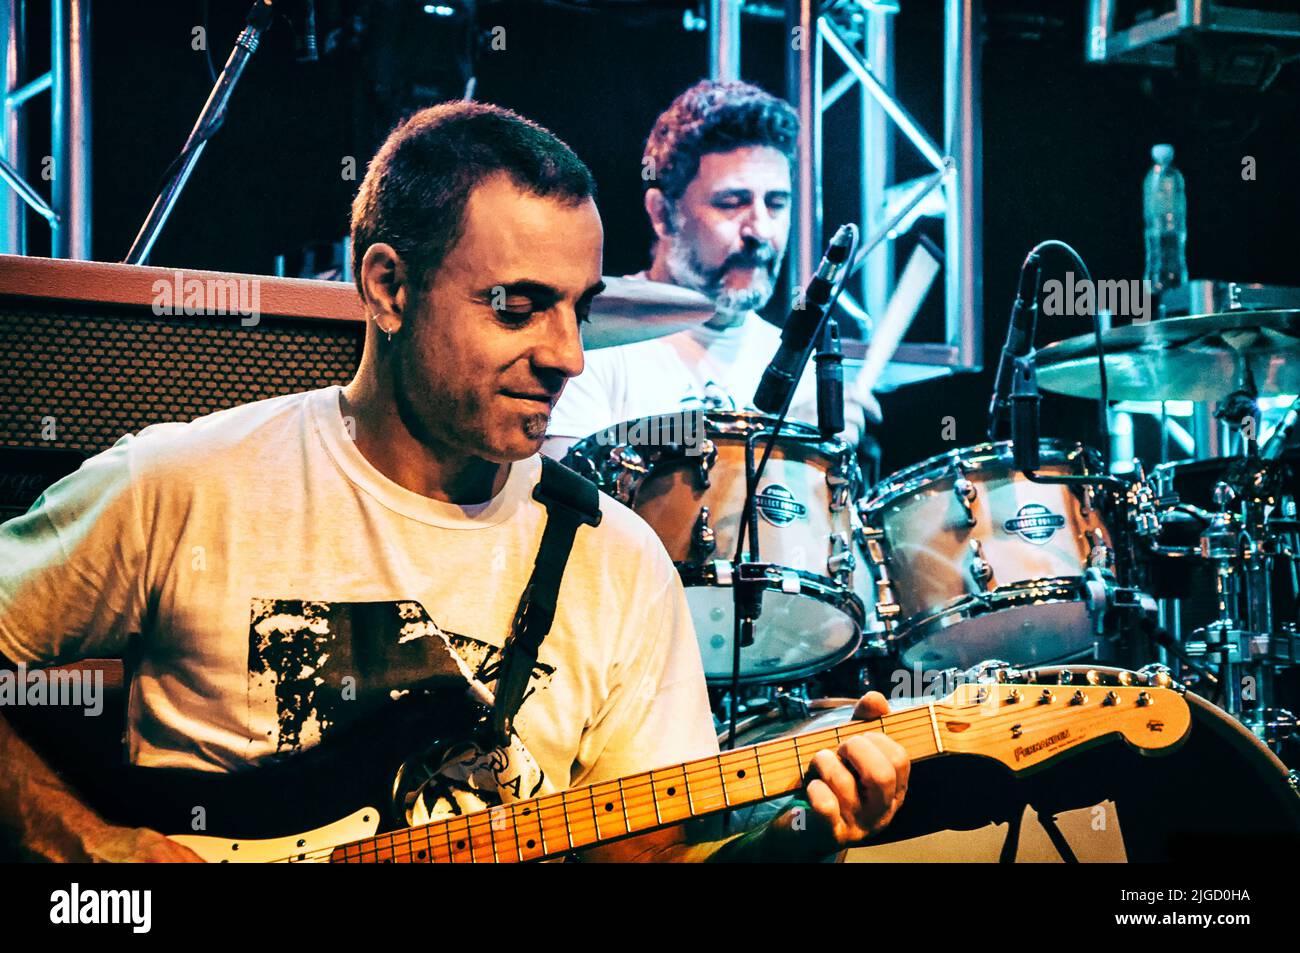 Nonpalidece - The reggae band in a live show in Argentina Stock Photo